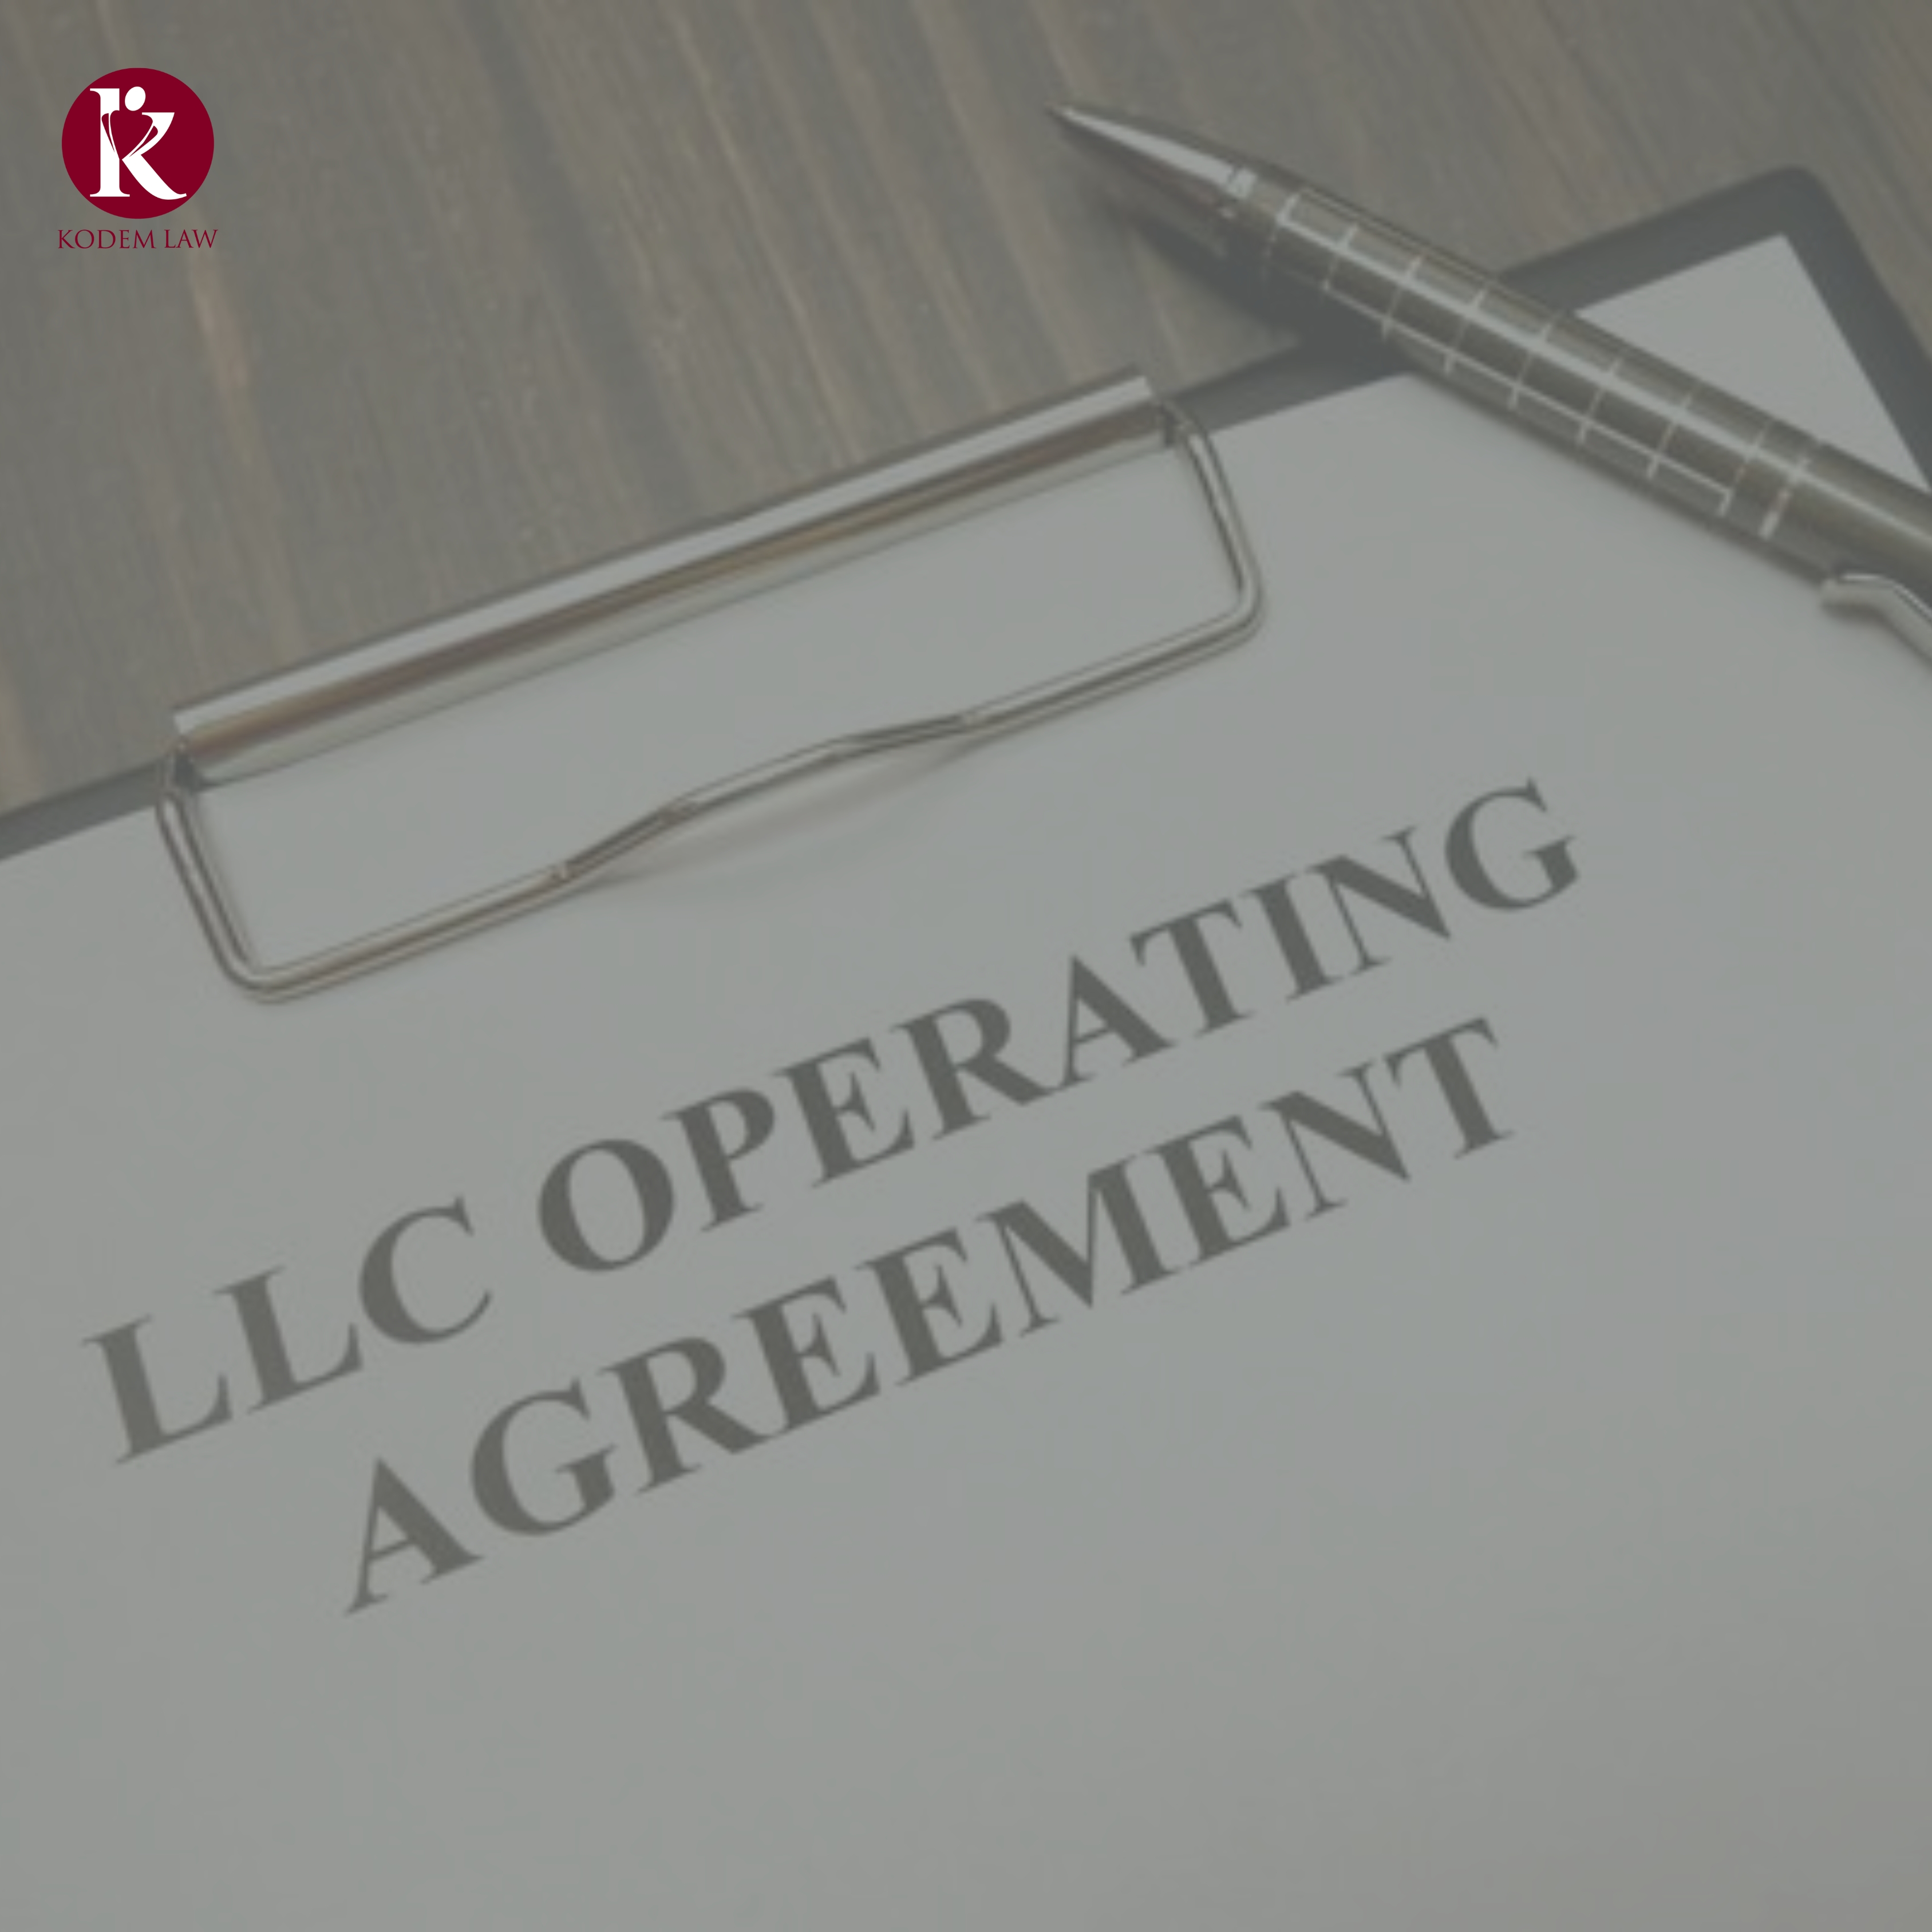 Operating Agreement – A Brief Overview